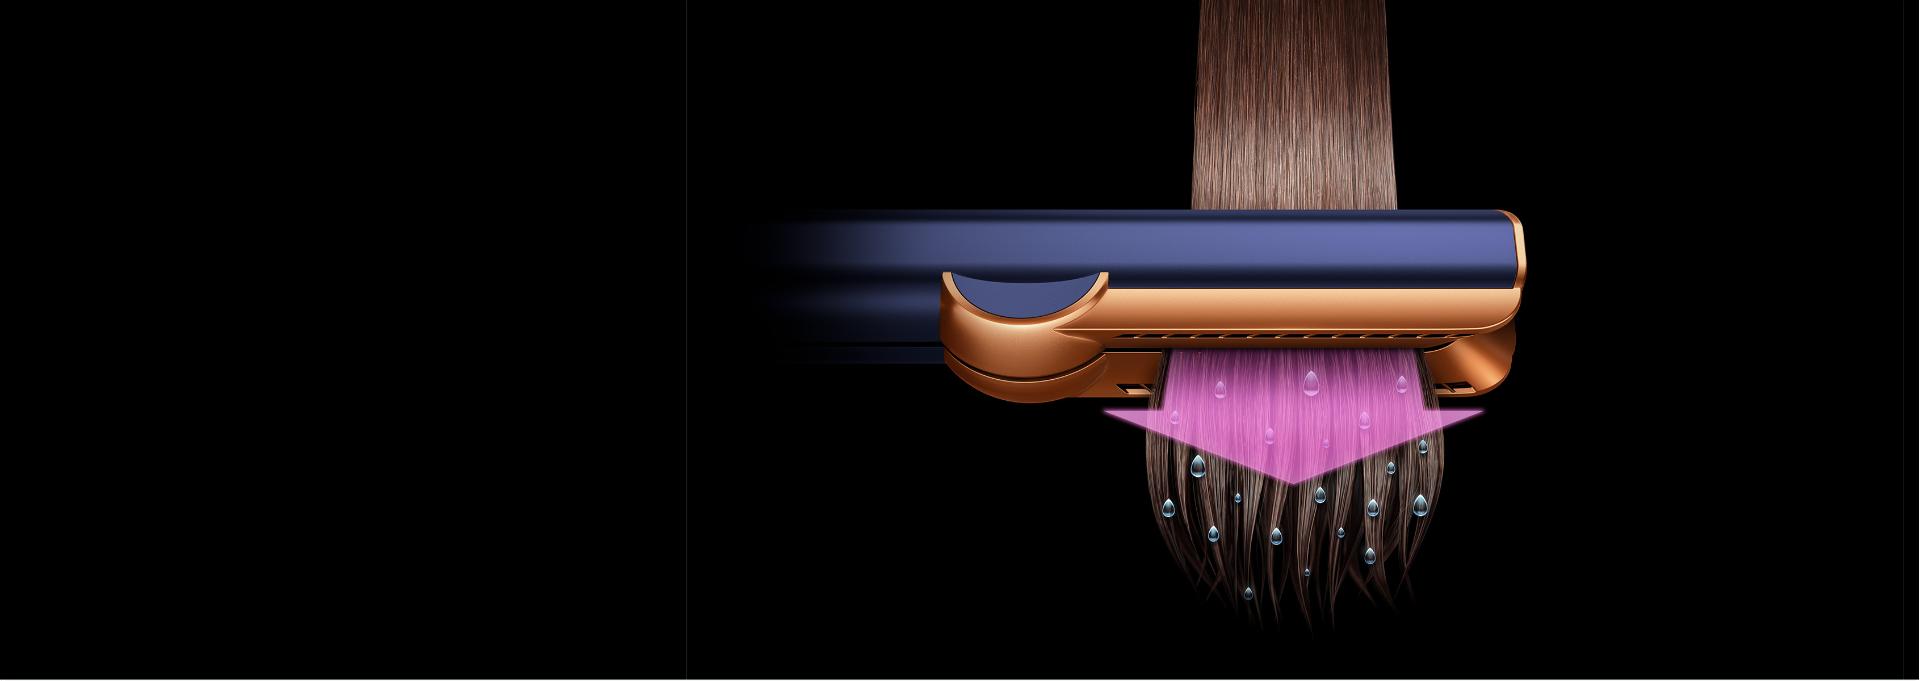 A Dyson Airstrait straightener passes over a tress of hair, with water droplets indicating drying.